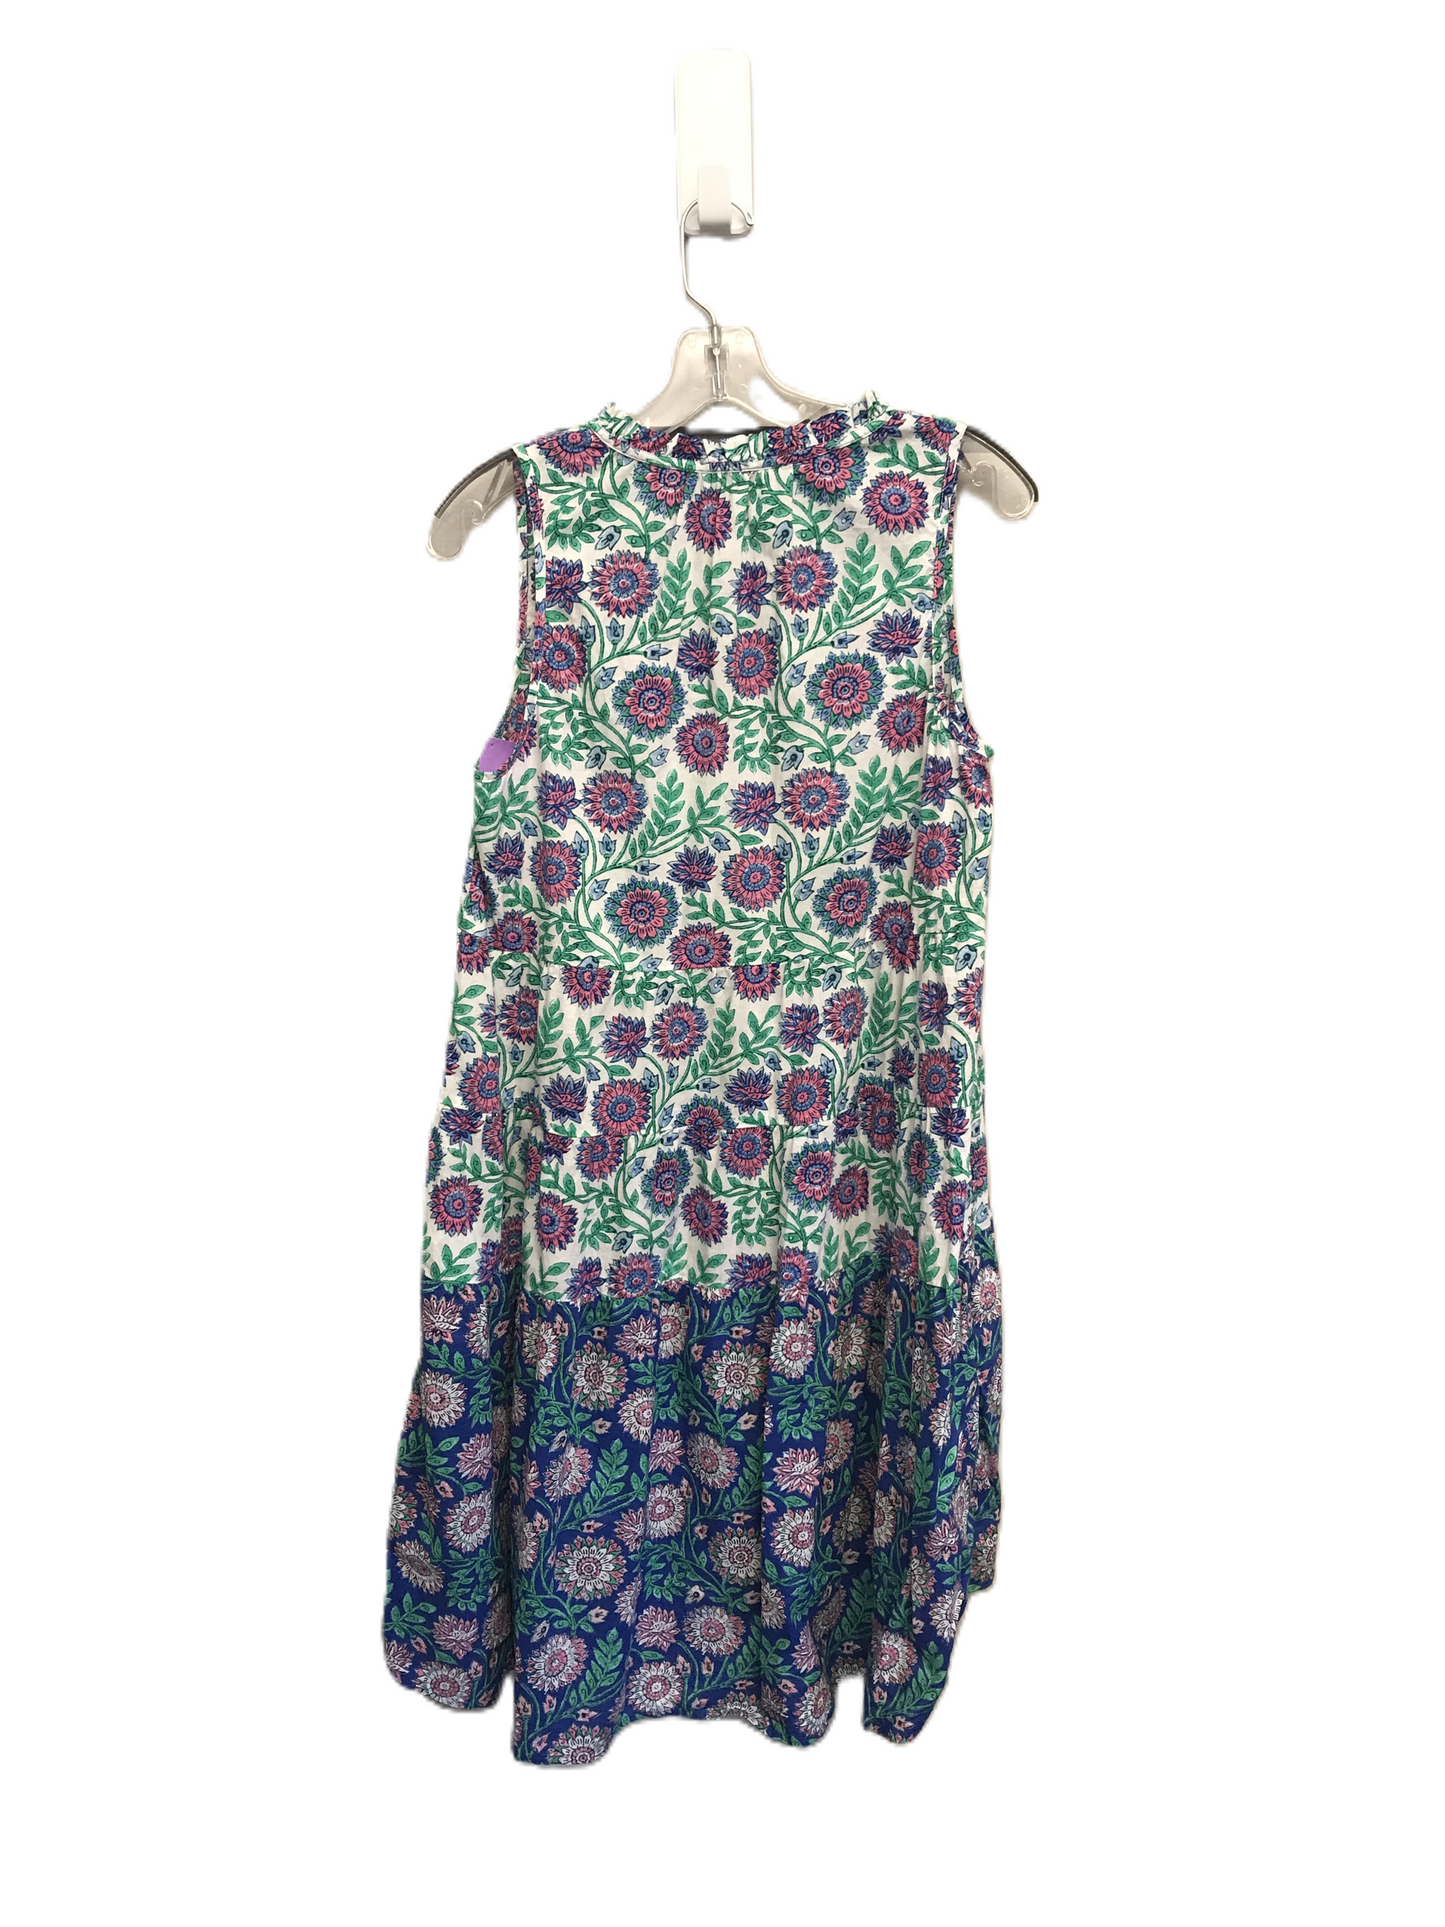 Floral Print Dress Casual Short By J. Crew, Size: S